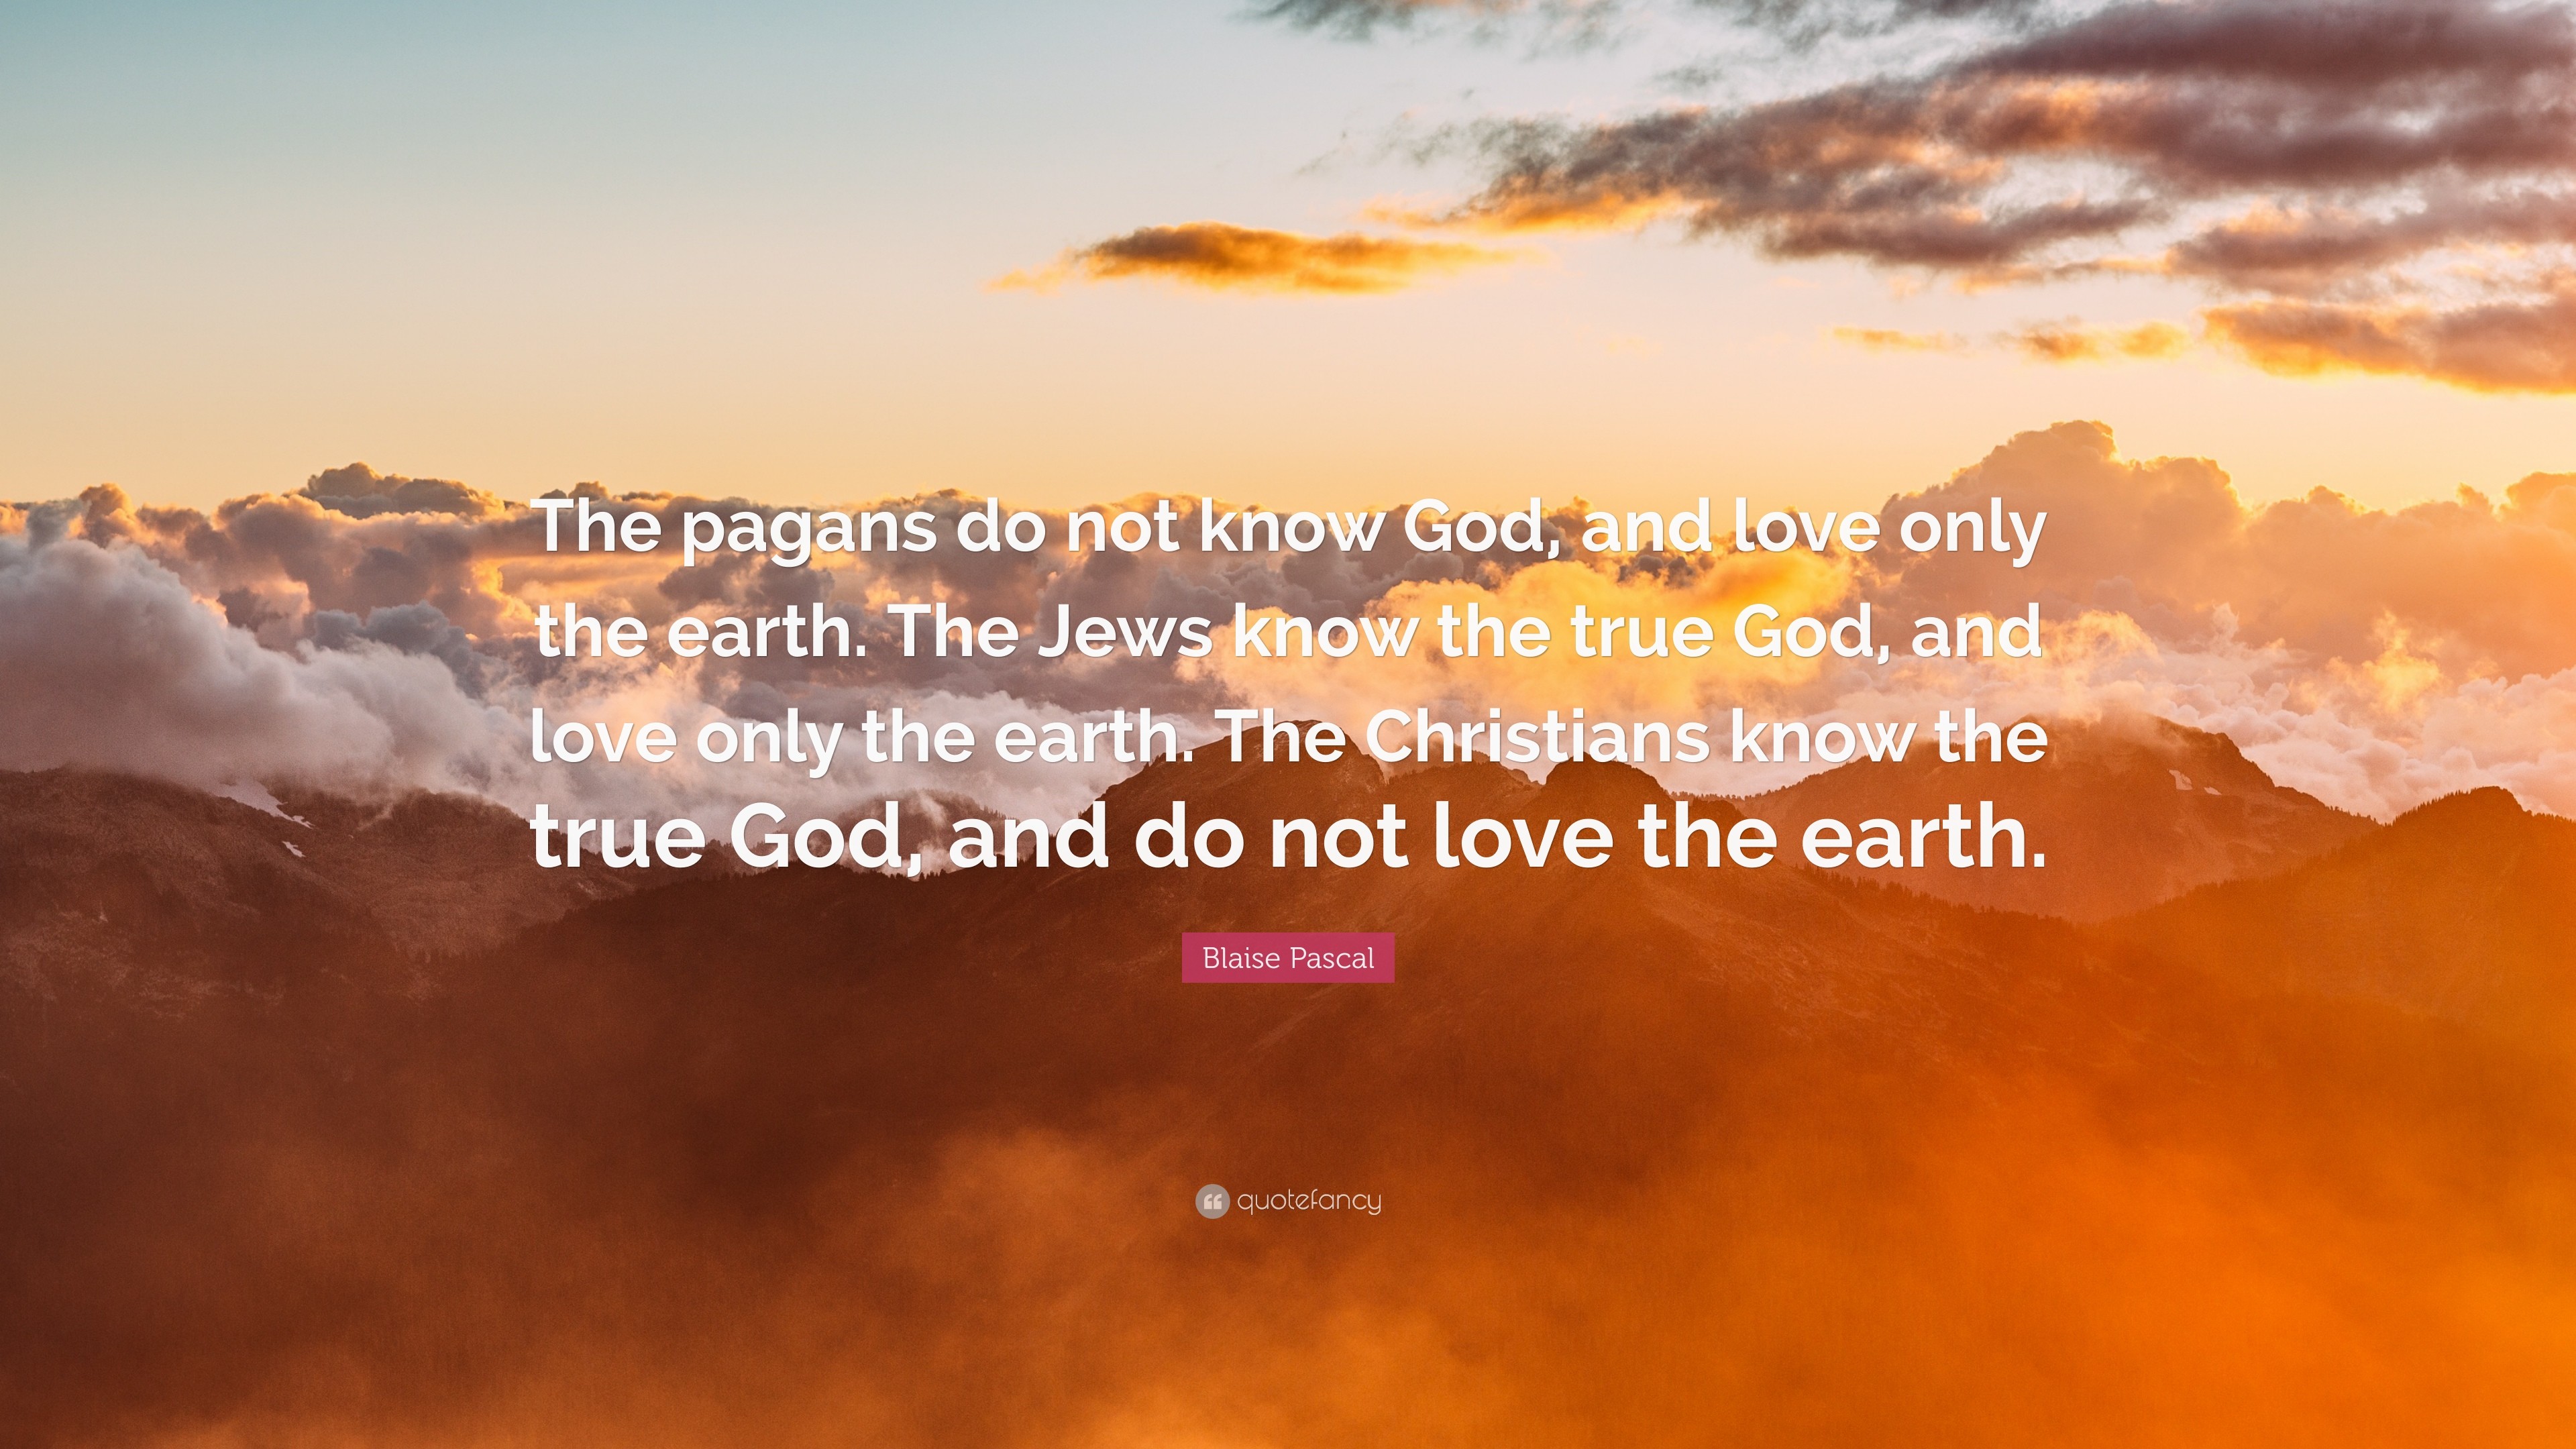 3840x2160 Blaise Pascal Quote: “The pagans do not know God, and love only the